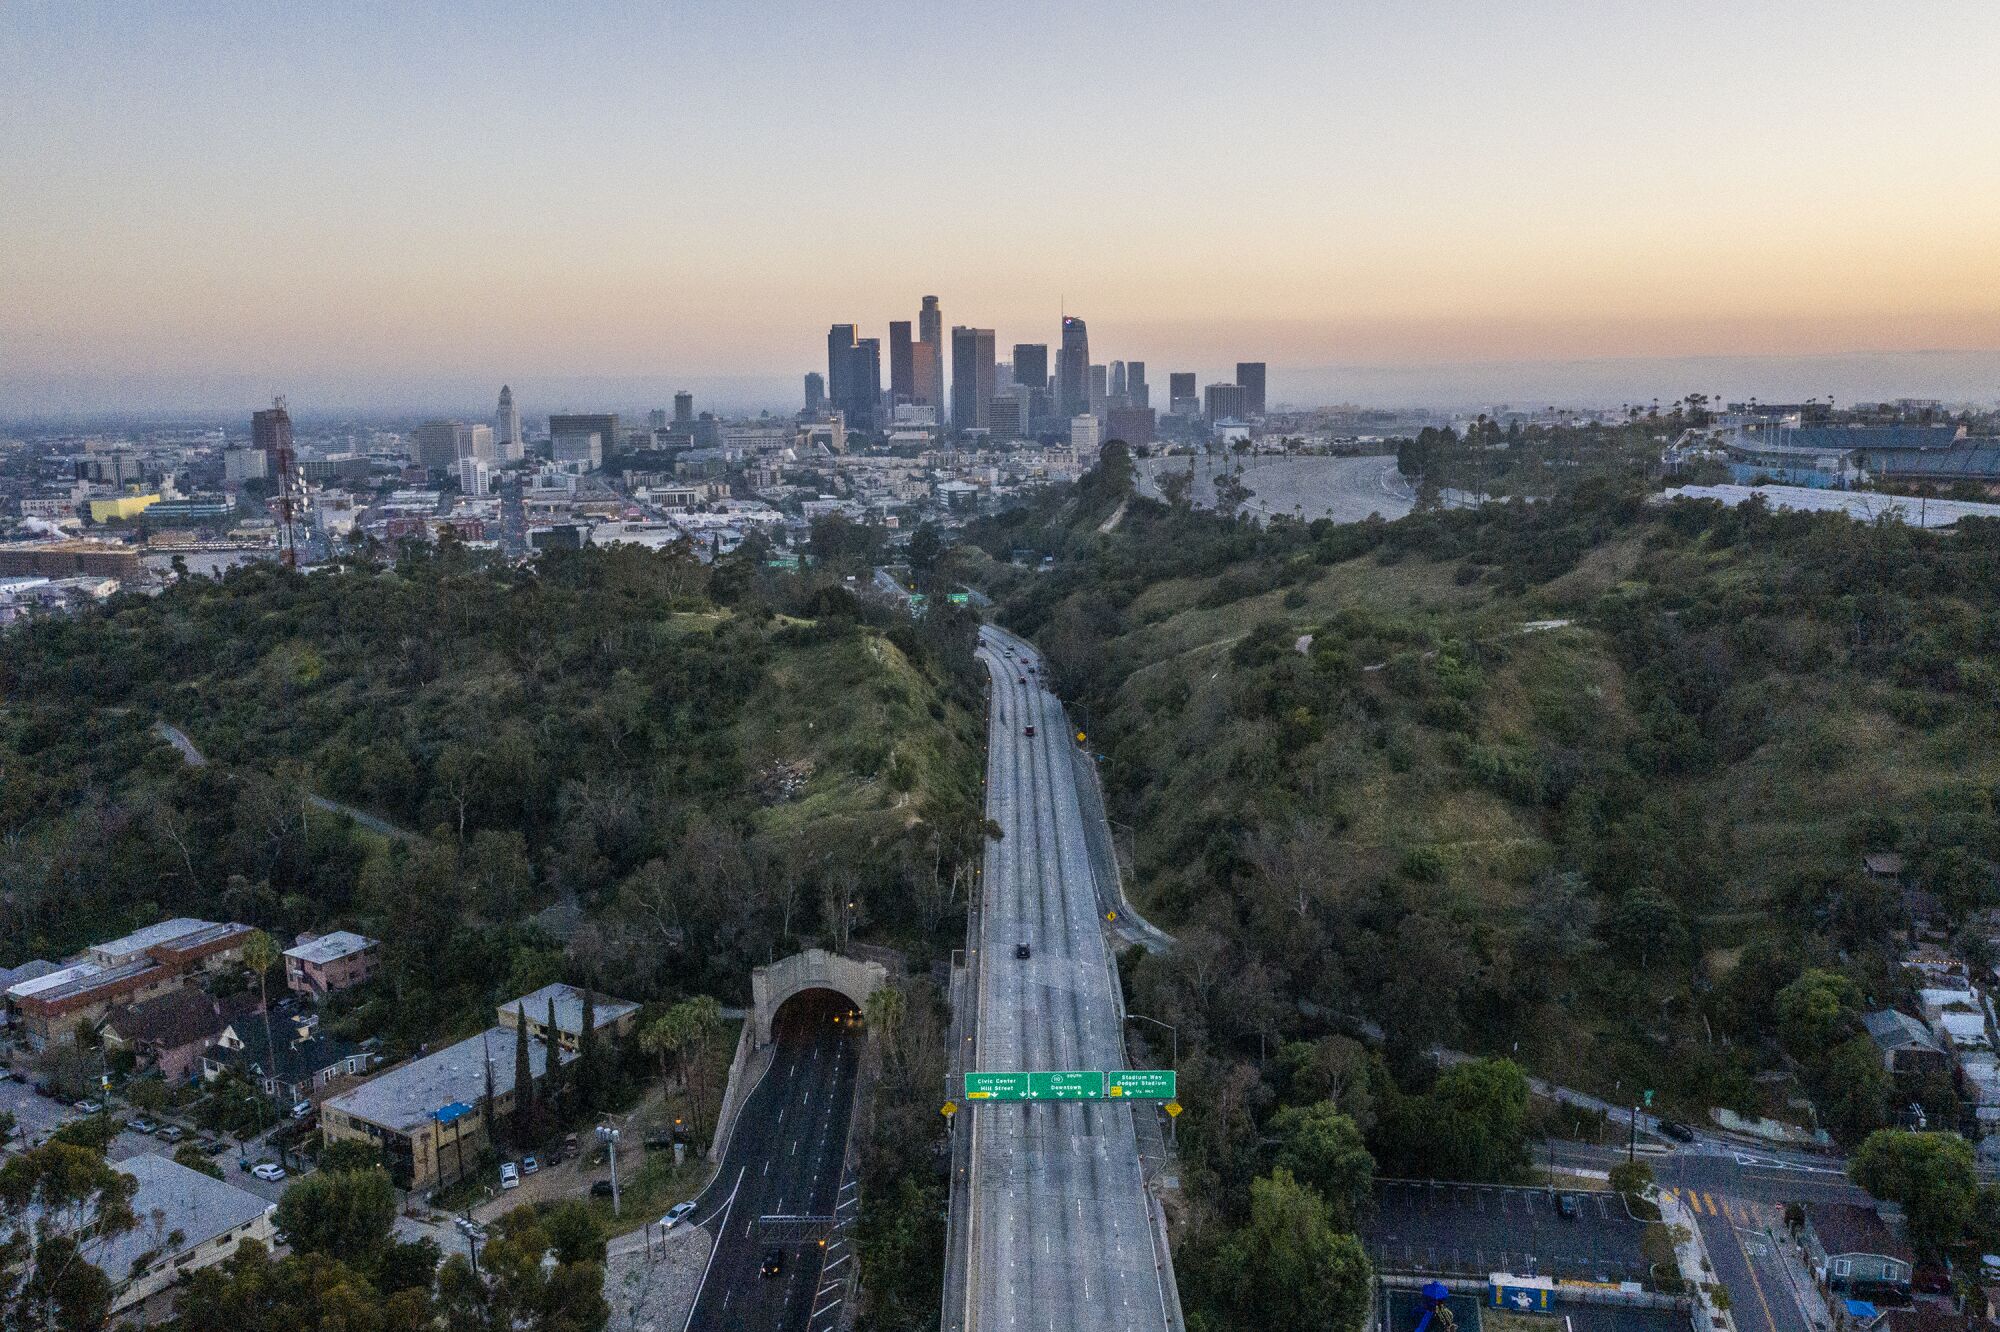 Aerial view of a mostly empty freeway running between green hills toward the downtown L.A. skyline